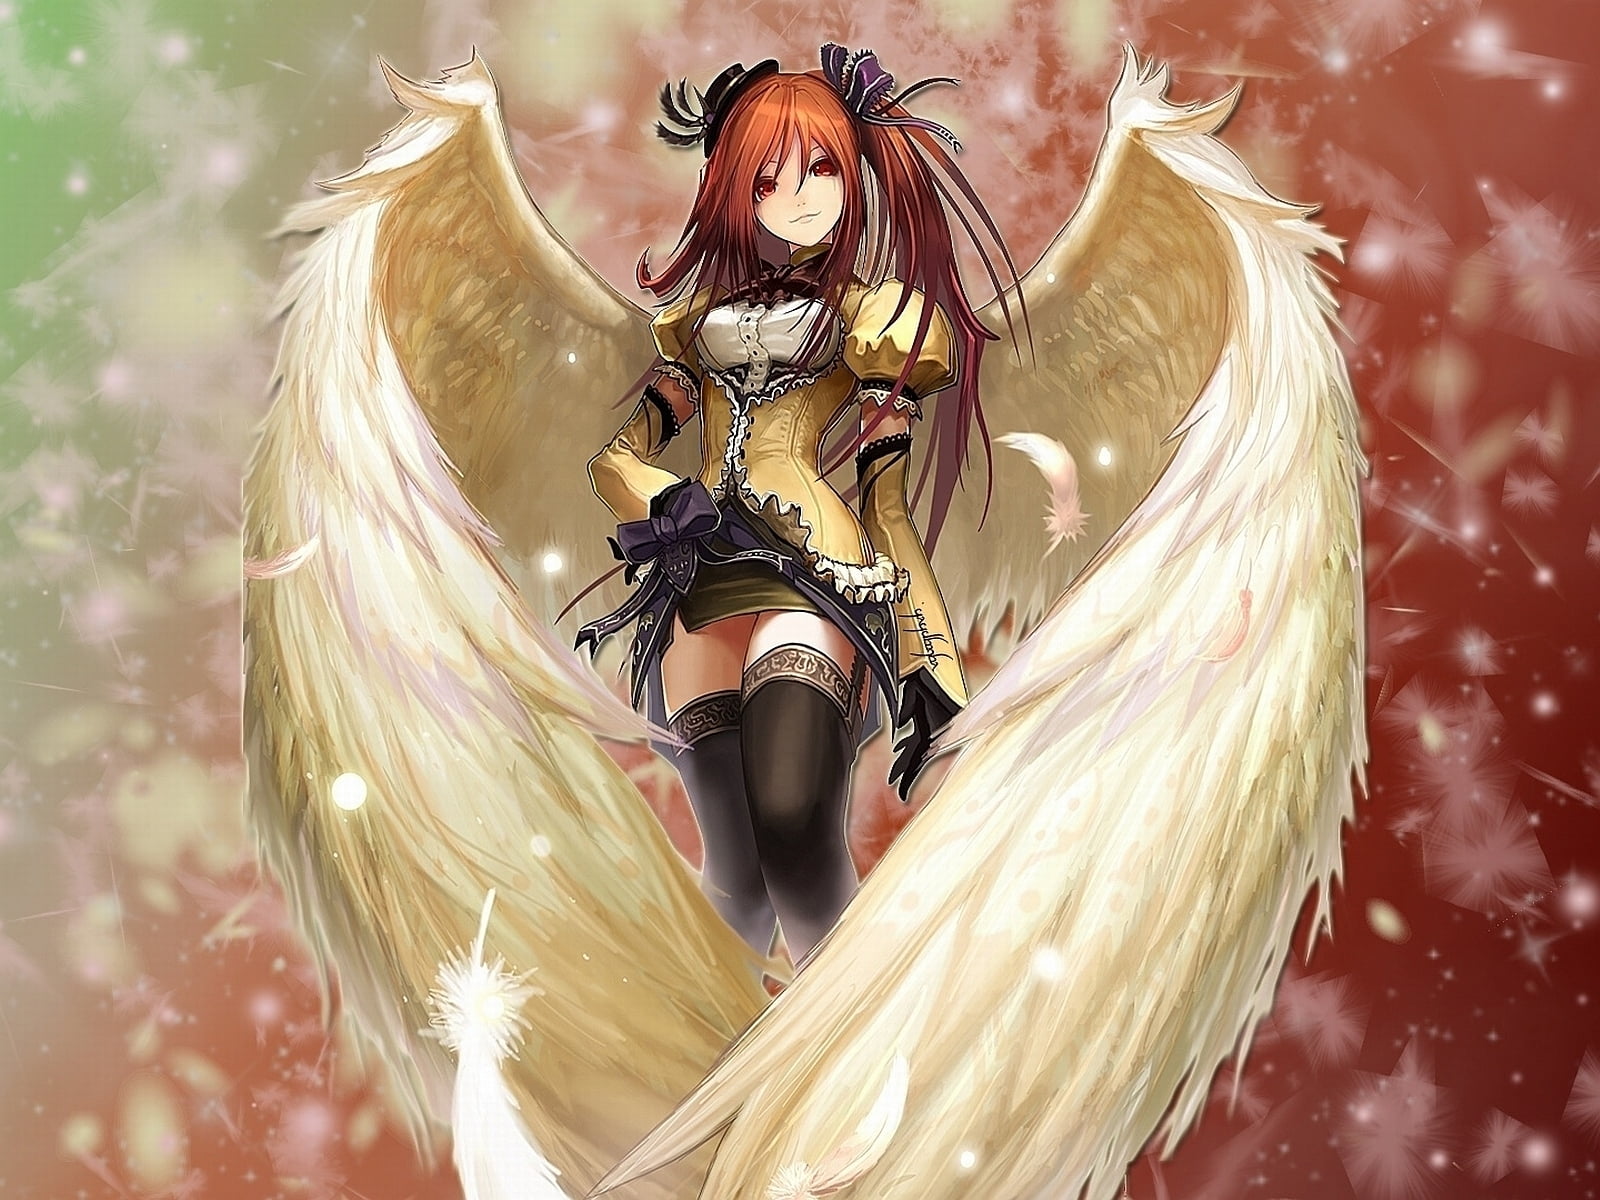 Girl Anime Character In Brown Dress With Wings Illustration Hd Wallpaper |  Wallpaper Flare